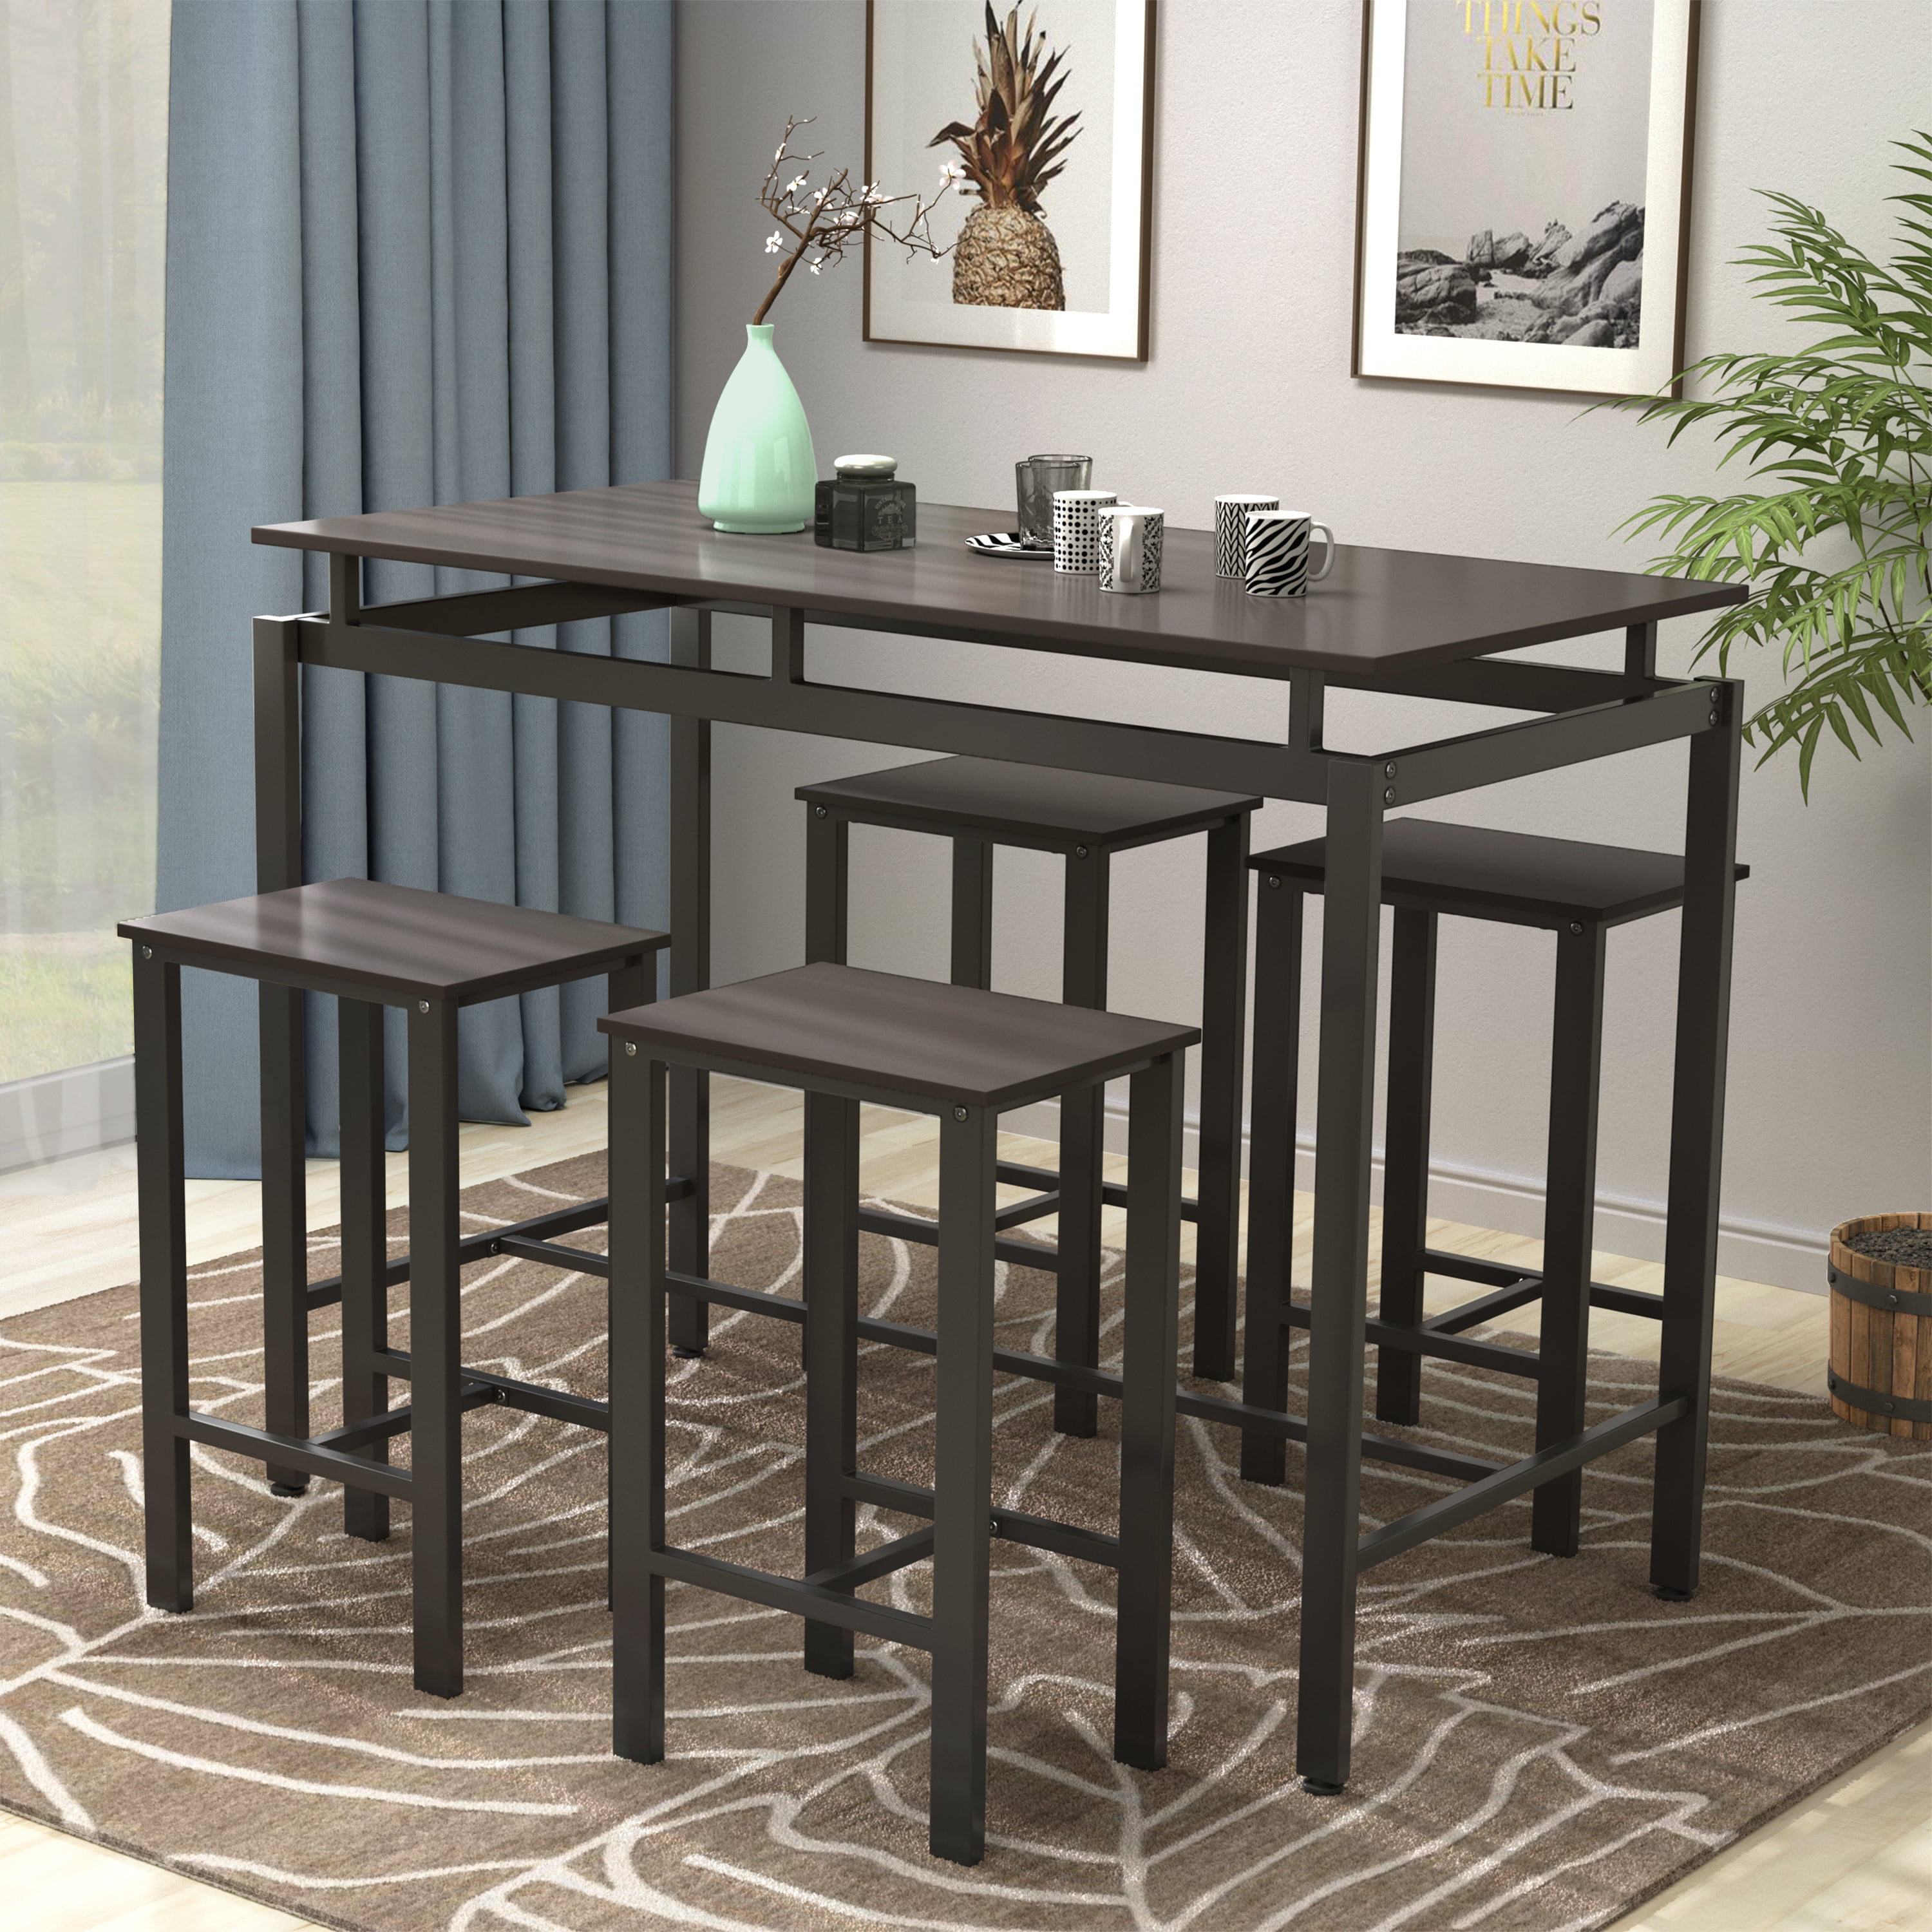 enyopro 5 Piece Bar Table Set, Kitchen Counter Height Table with 4